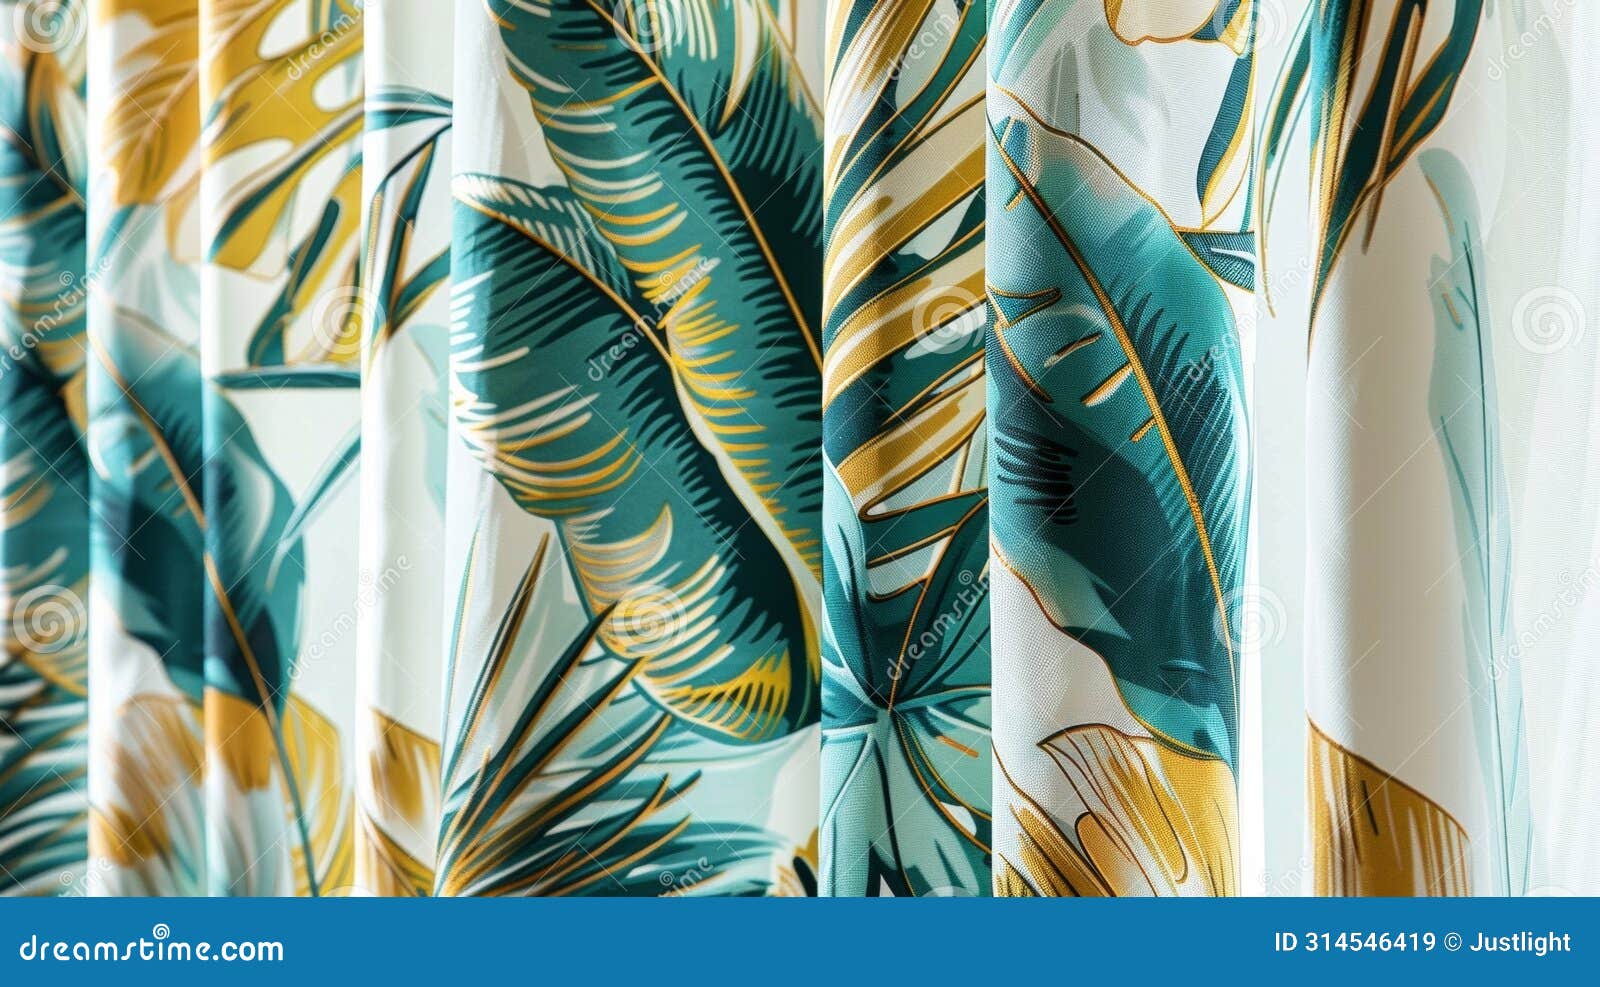 the curtains are made of a lightweight fabric with a largescale print of tropical flowers and giant palm leaves in